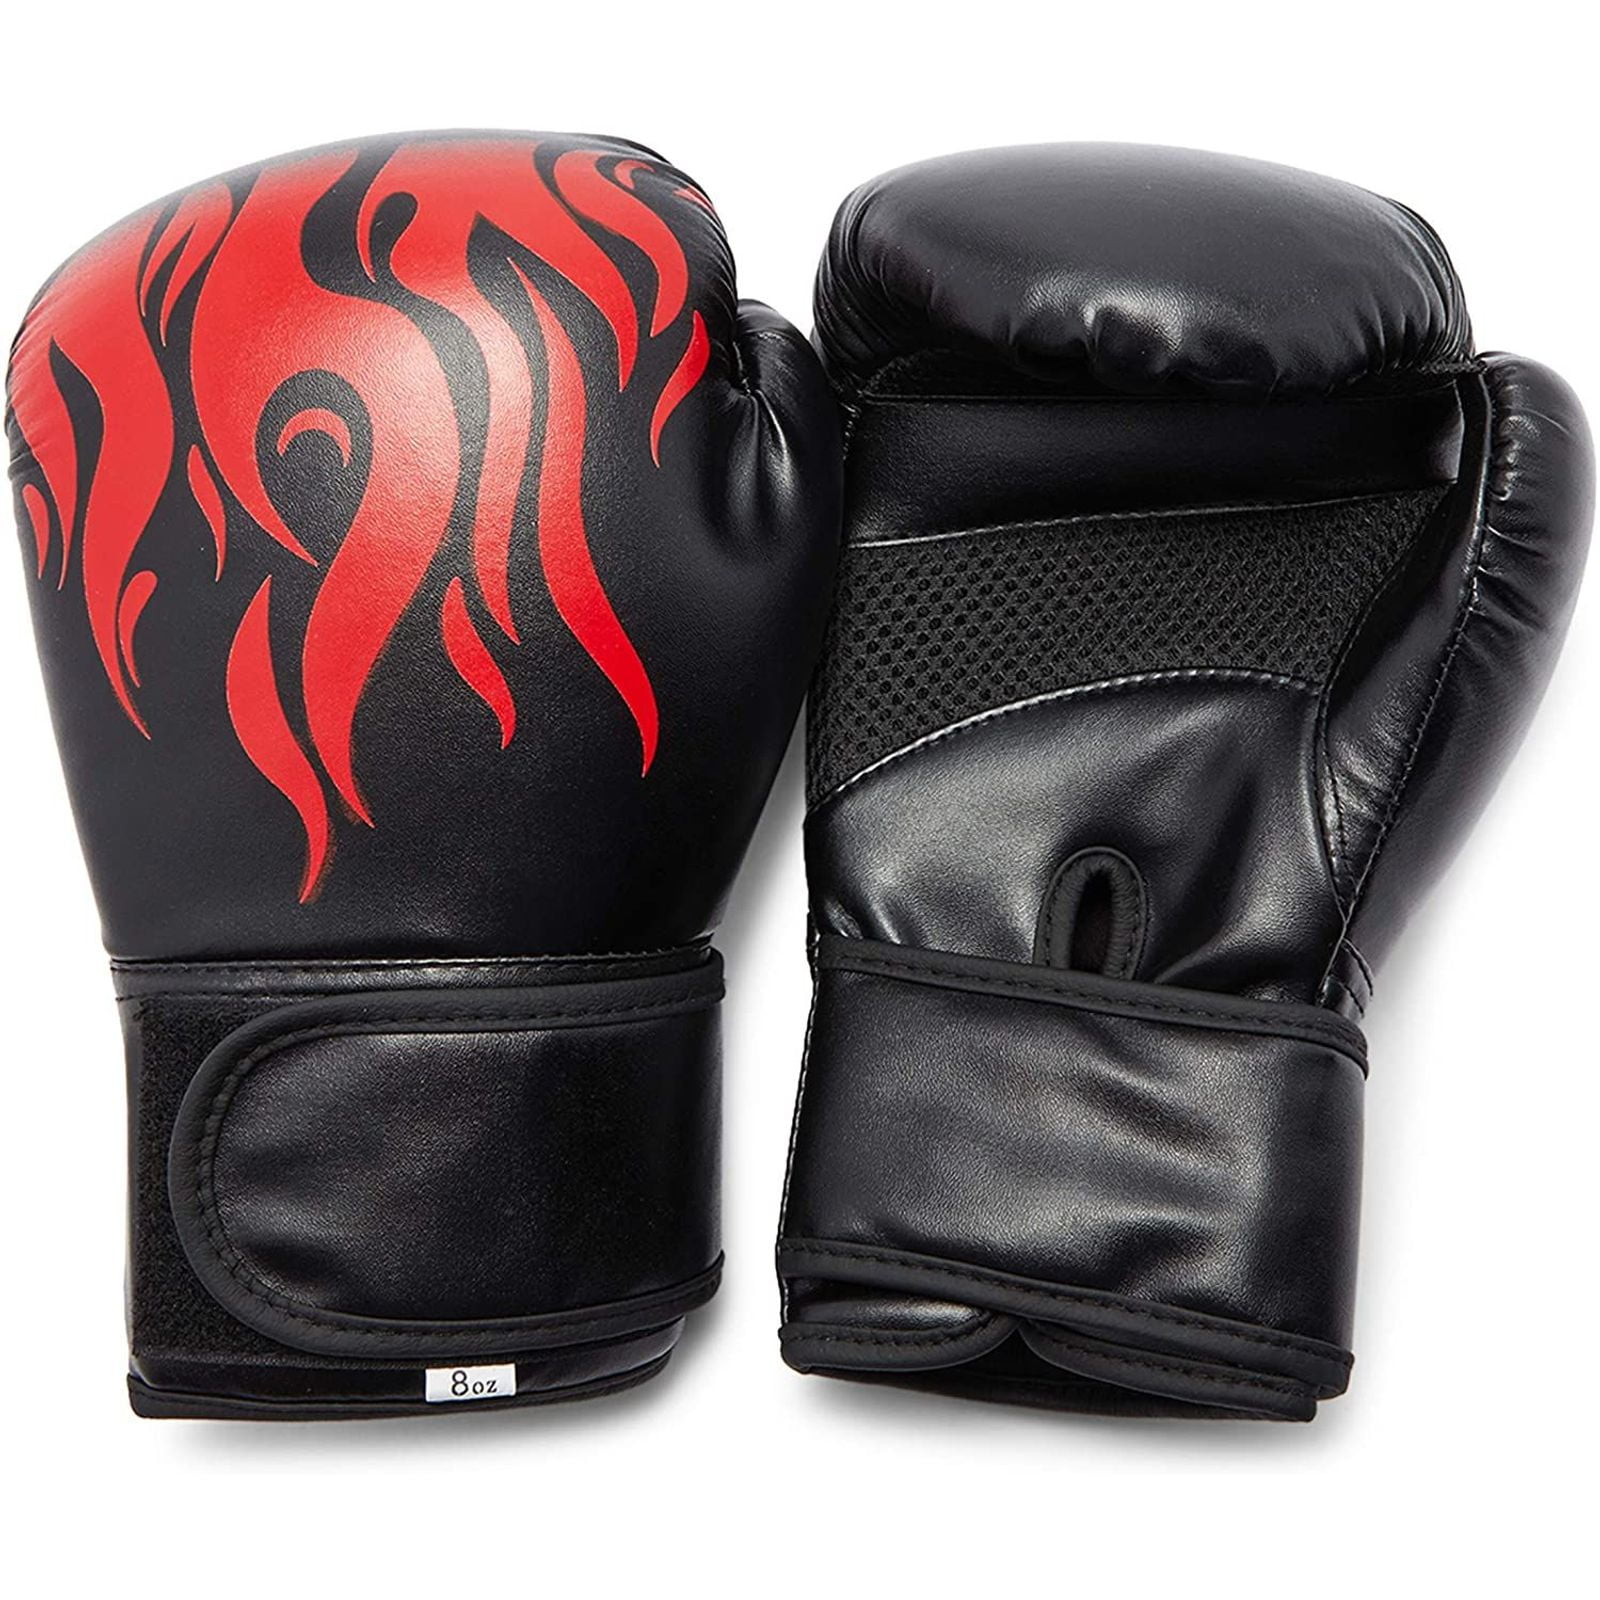 MMA Boxing Gloves Sparring Muay Thai Kick Gym Training Punching Punch Bag Mitts 